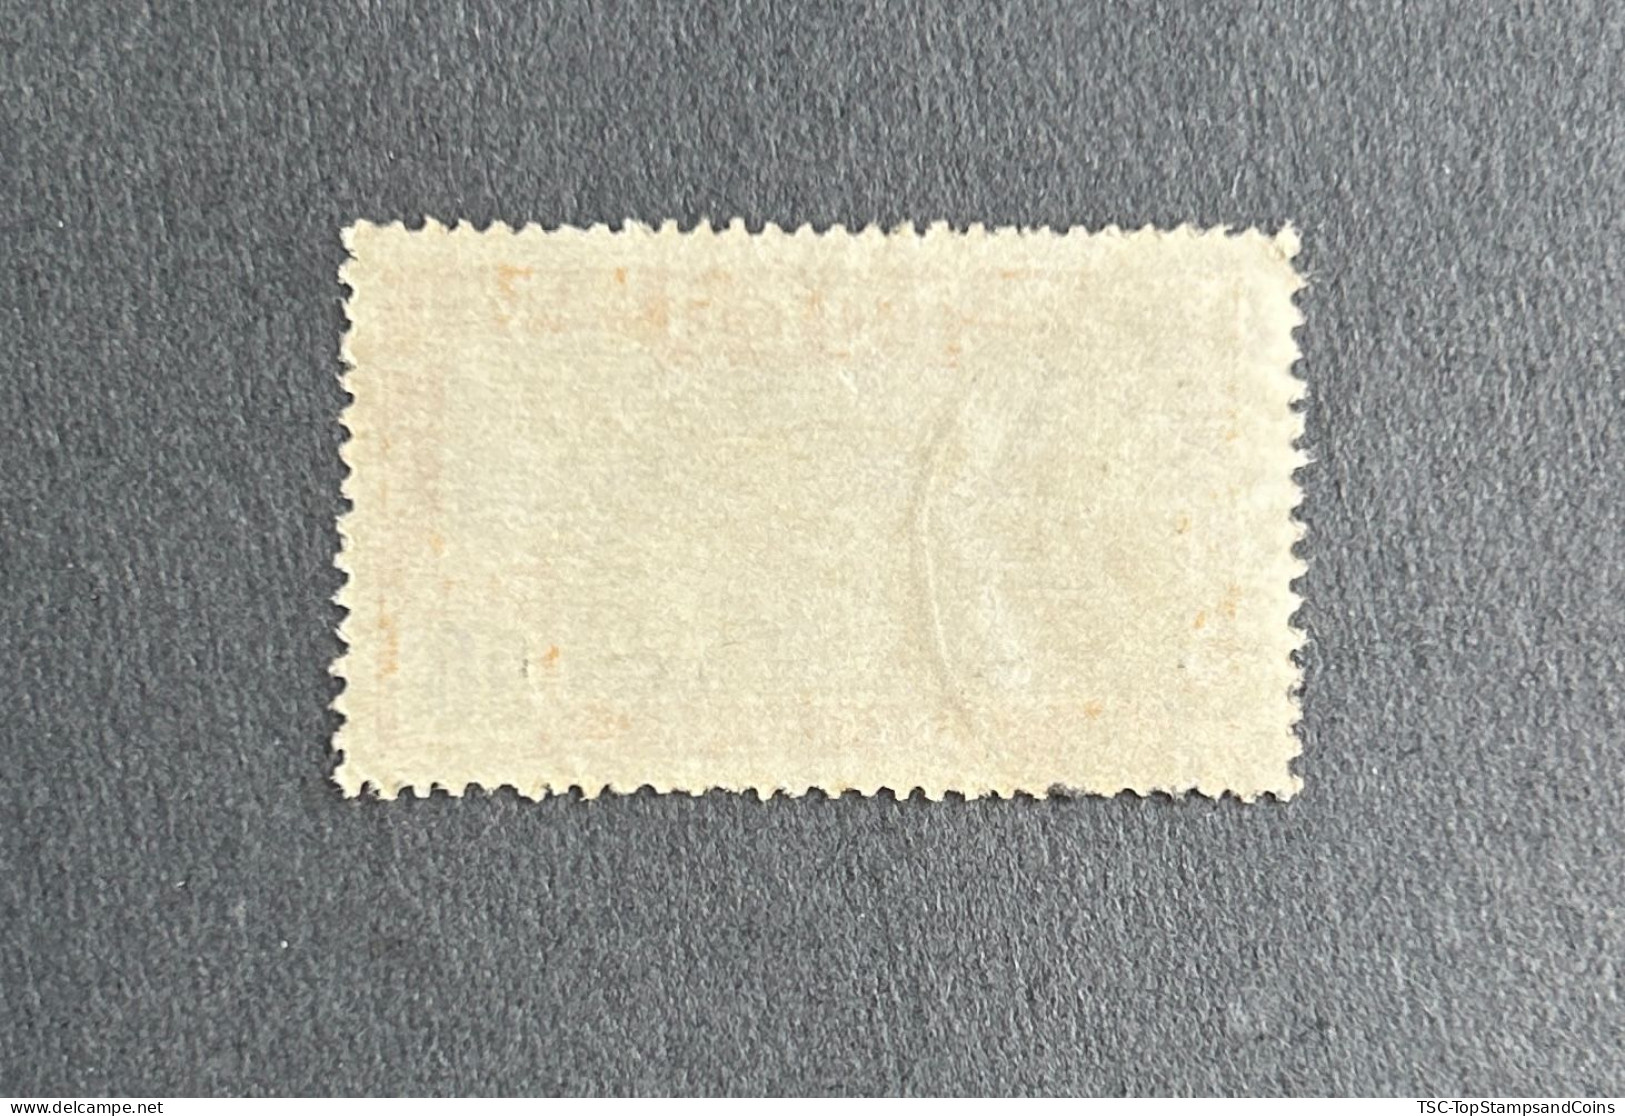 FRTG0136U7 - Agriculture - Cocoa Plantation - 50 C Used Stamp - French Togo - 1924 - Gebraucht